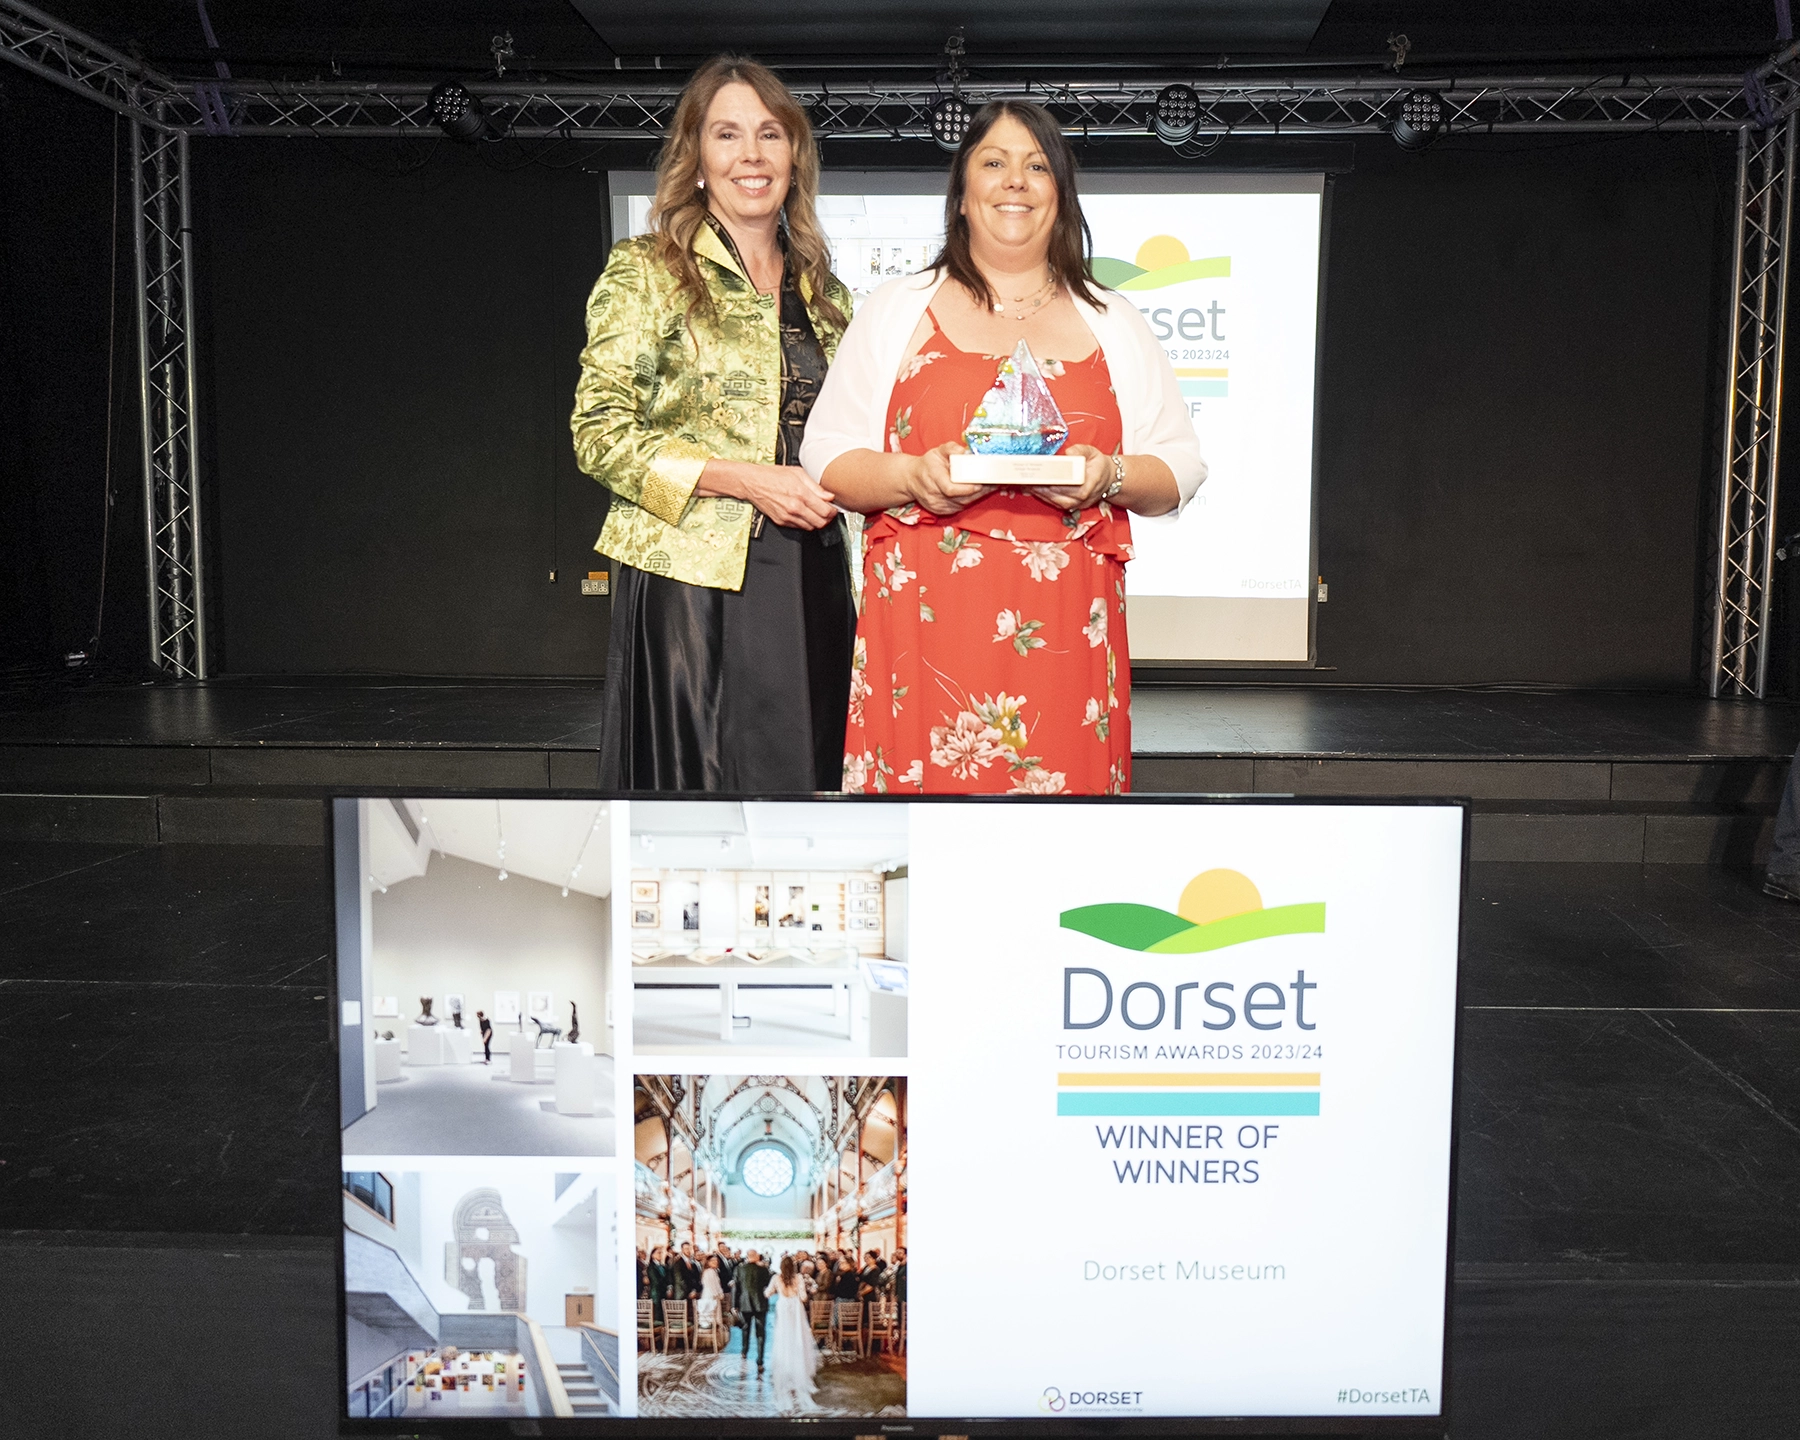 Dorset Museum was crowned the winner of winners. Pictures: Nick Williams